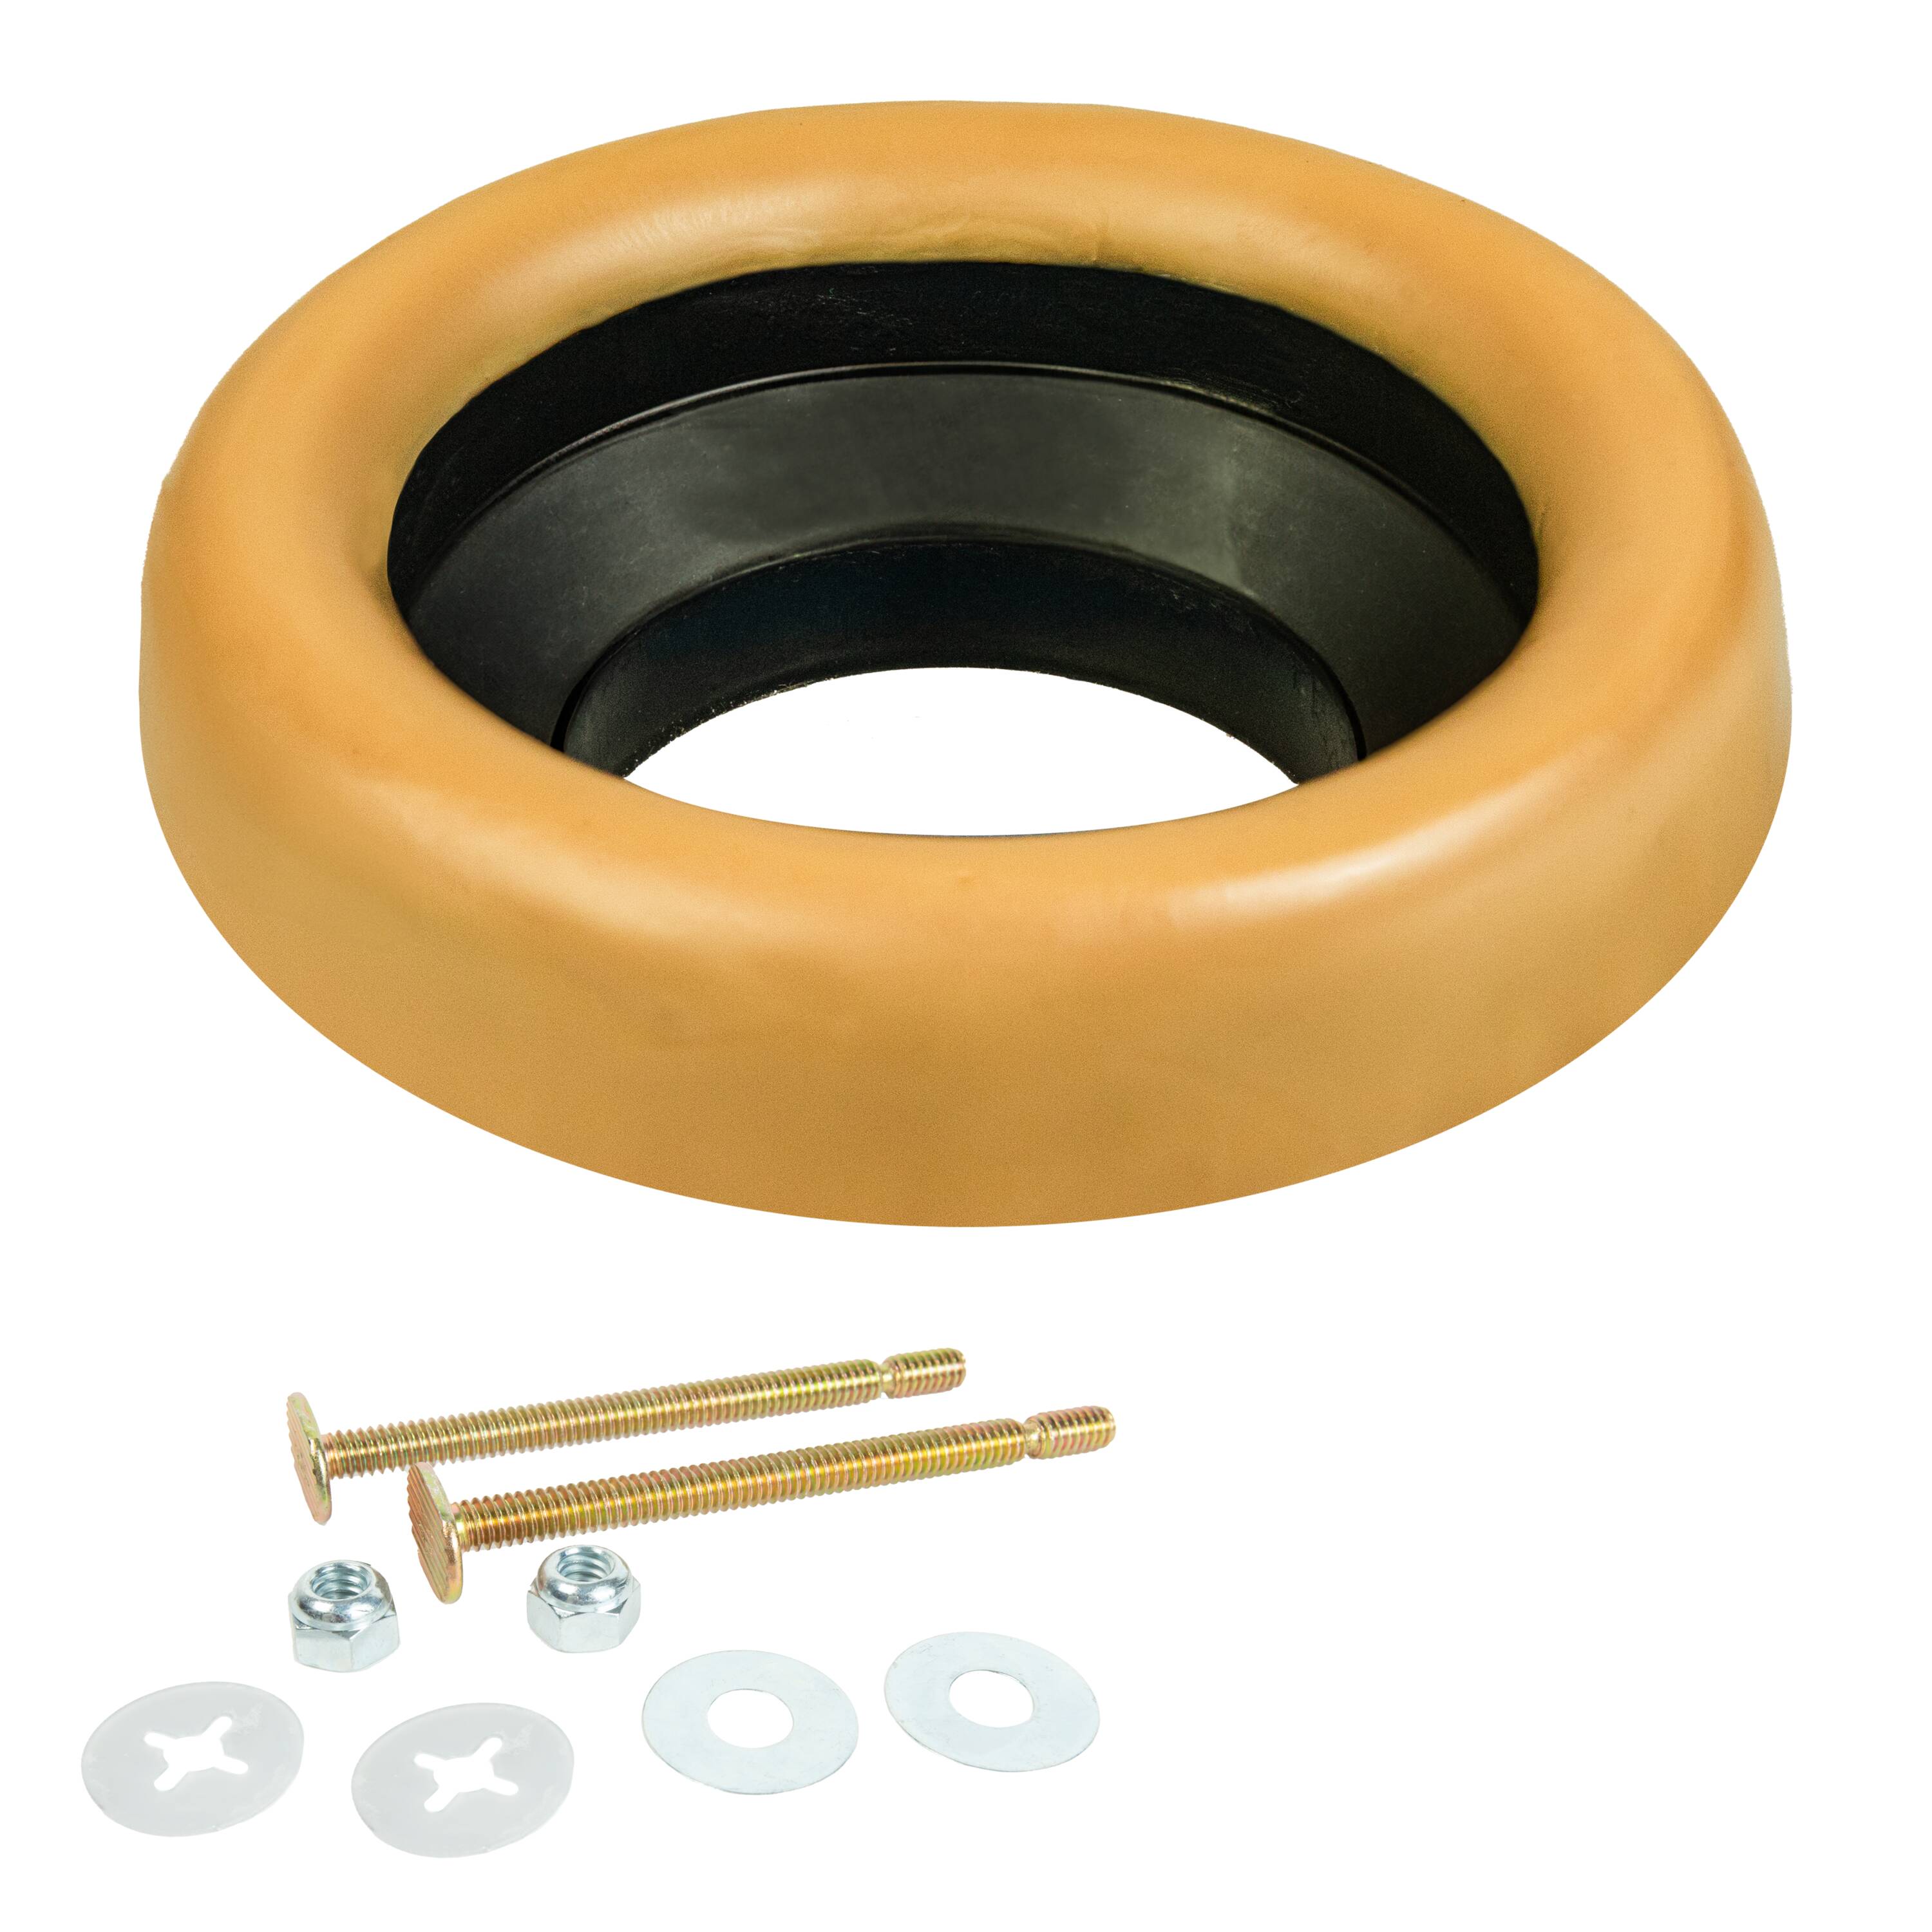 Norme 11 Pieces Toilet Wax Ring Kit Include Closet Bolts Bolt Caps Thick Flange and Retainer Washers Fits 3 inch 4 Waste Lines for at MechanicSurplus.com